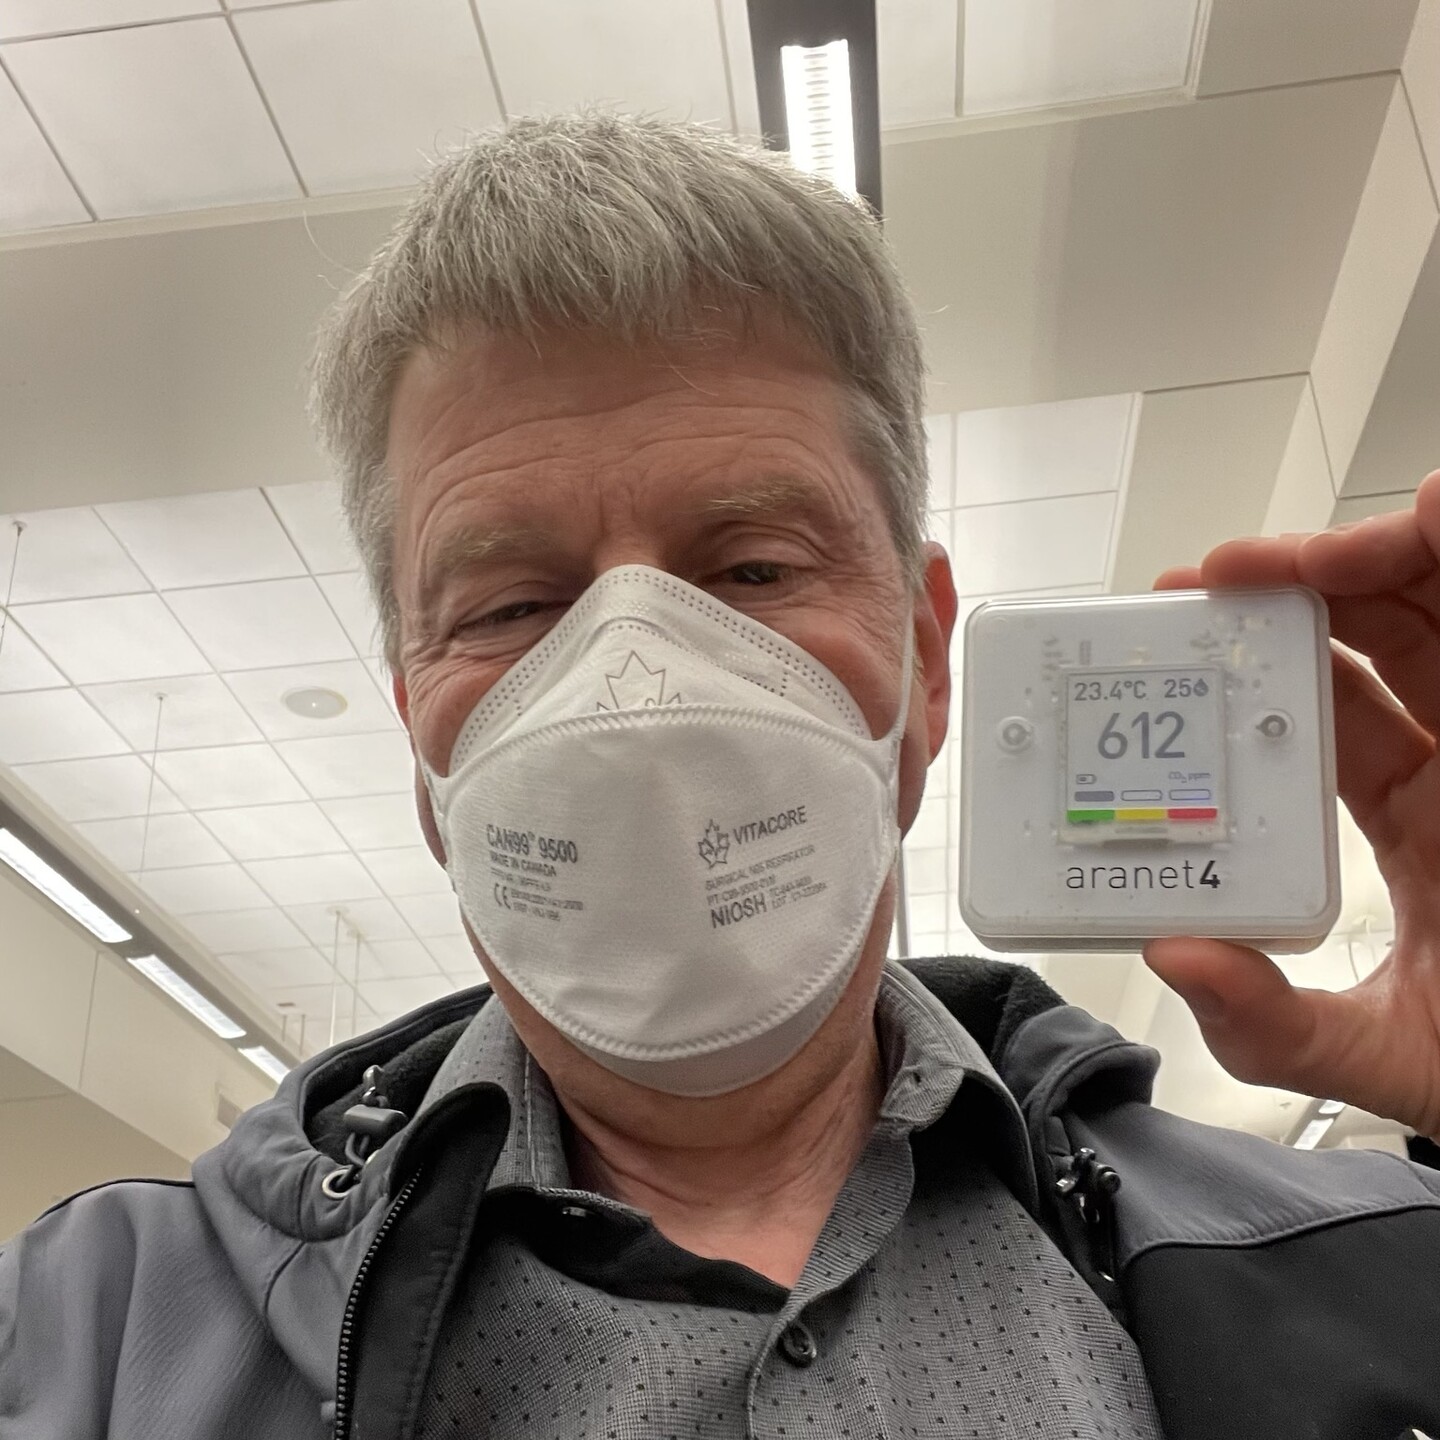 Selfie with me in a CAN99/N95 mask and my Aranet4 showing 612 ppm CO2